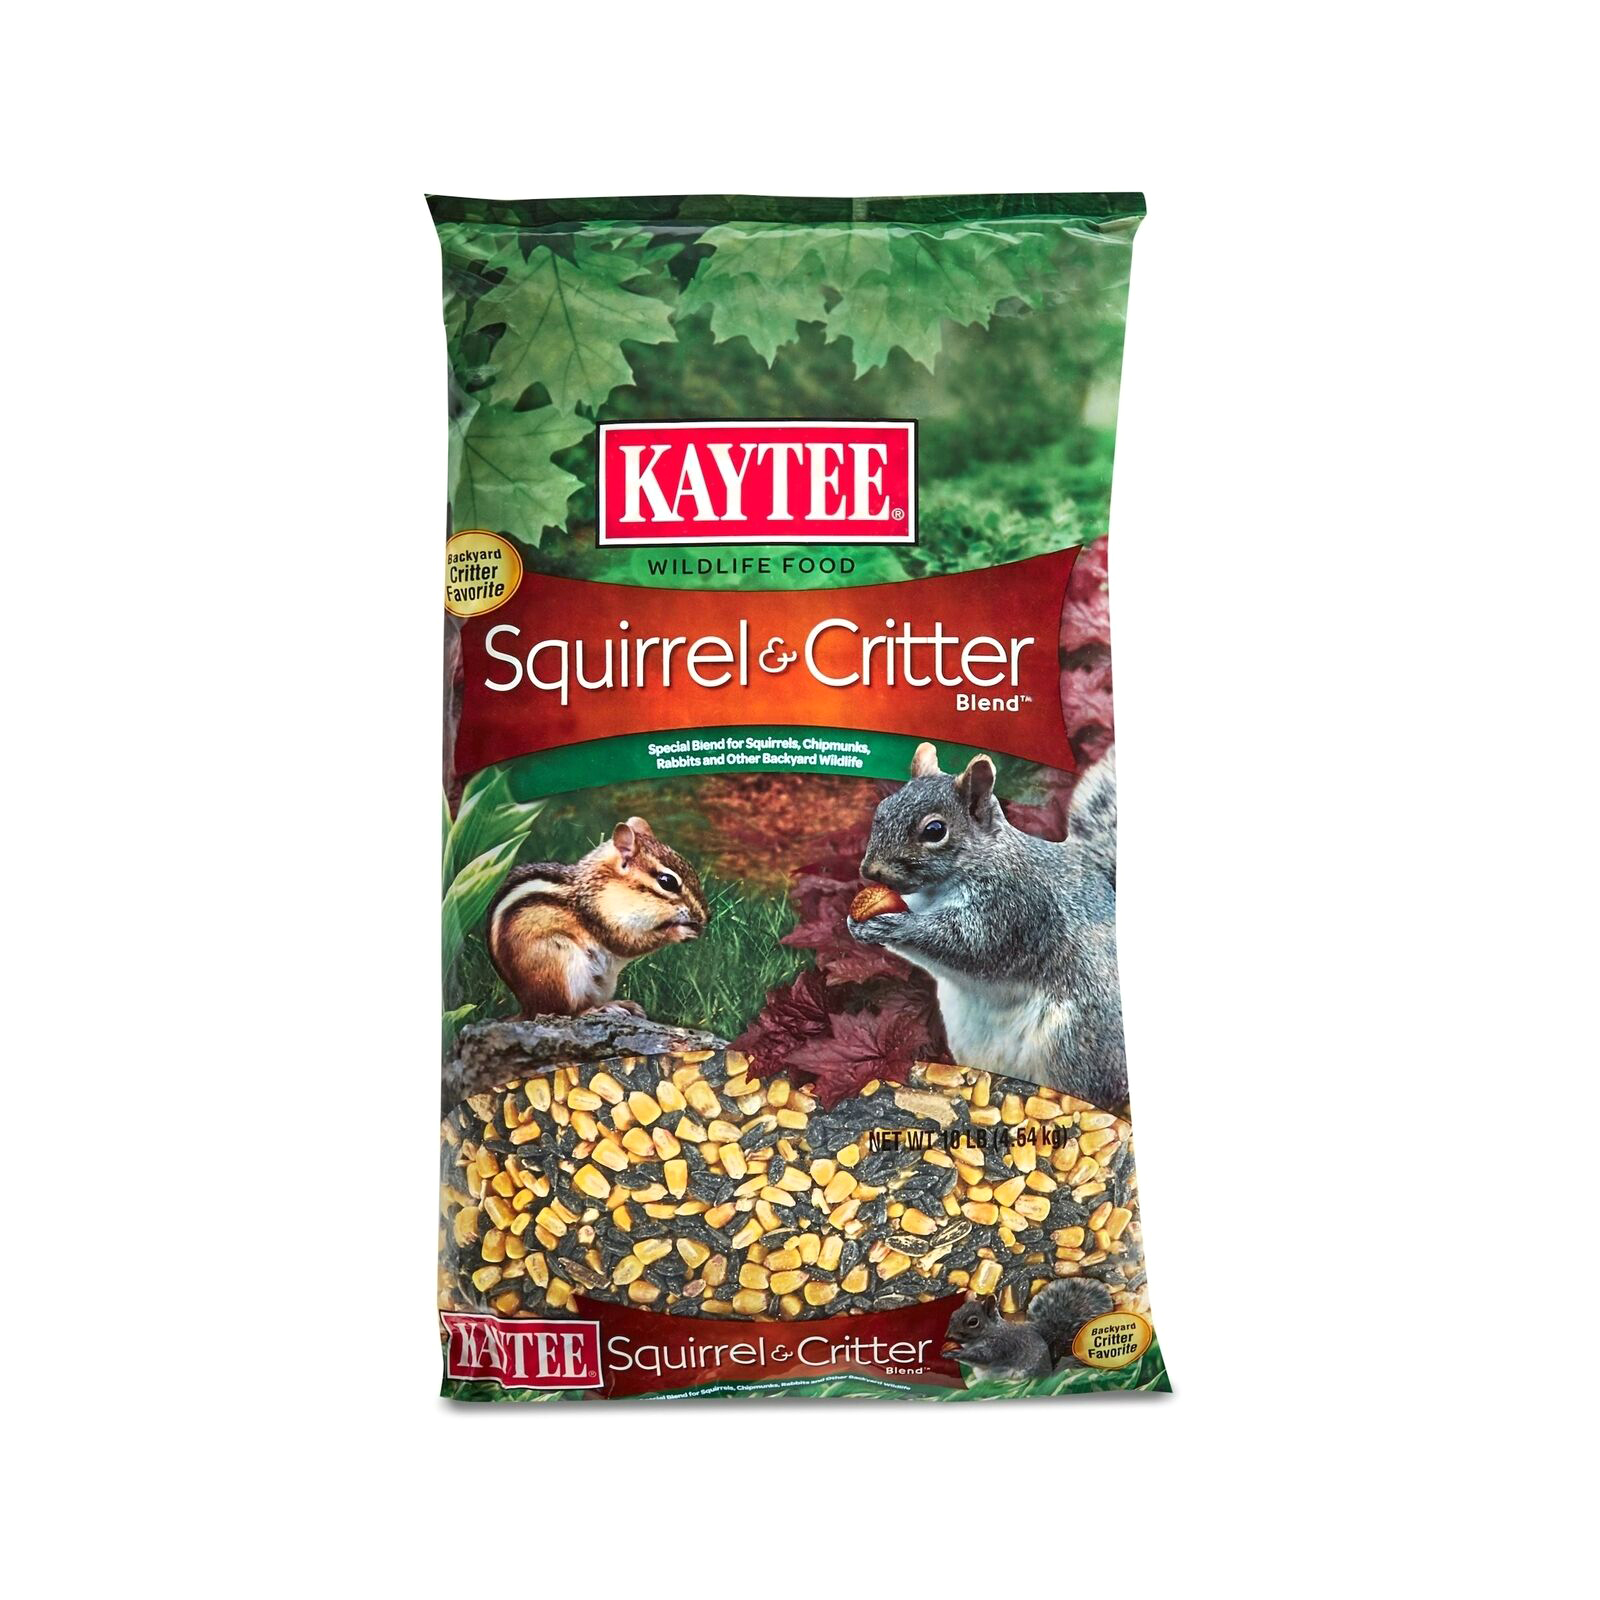 Kaytee Pet Products 100061937-4 10lb Squirrel and Critter Food